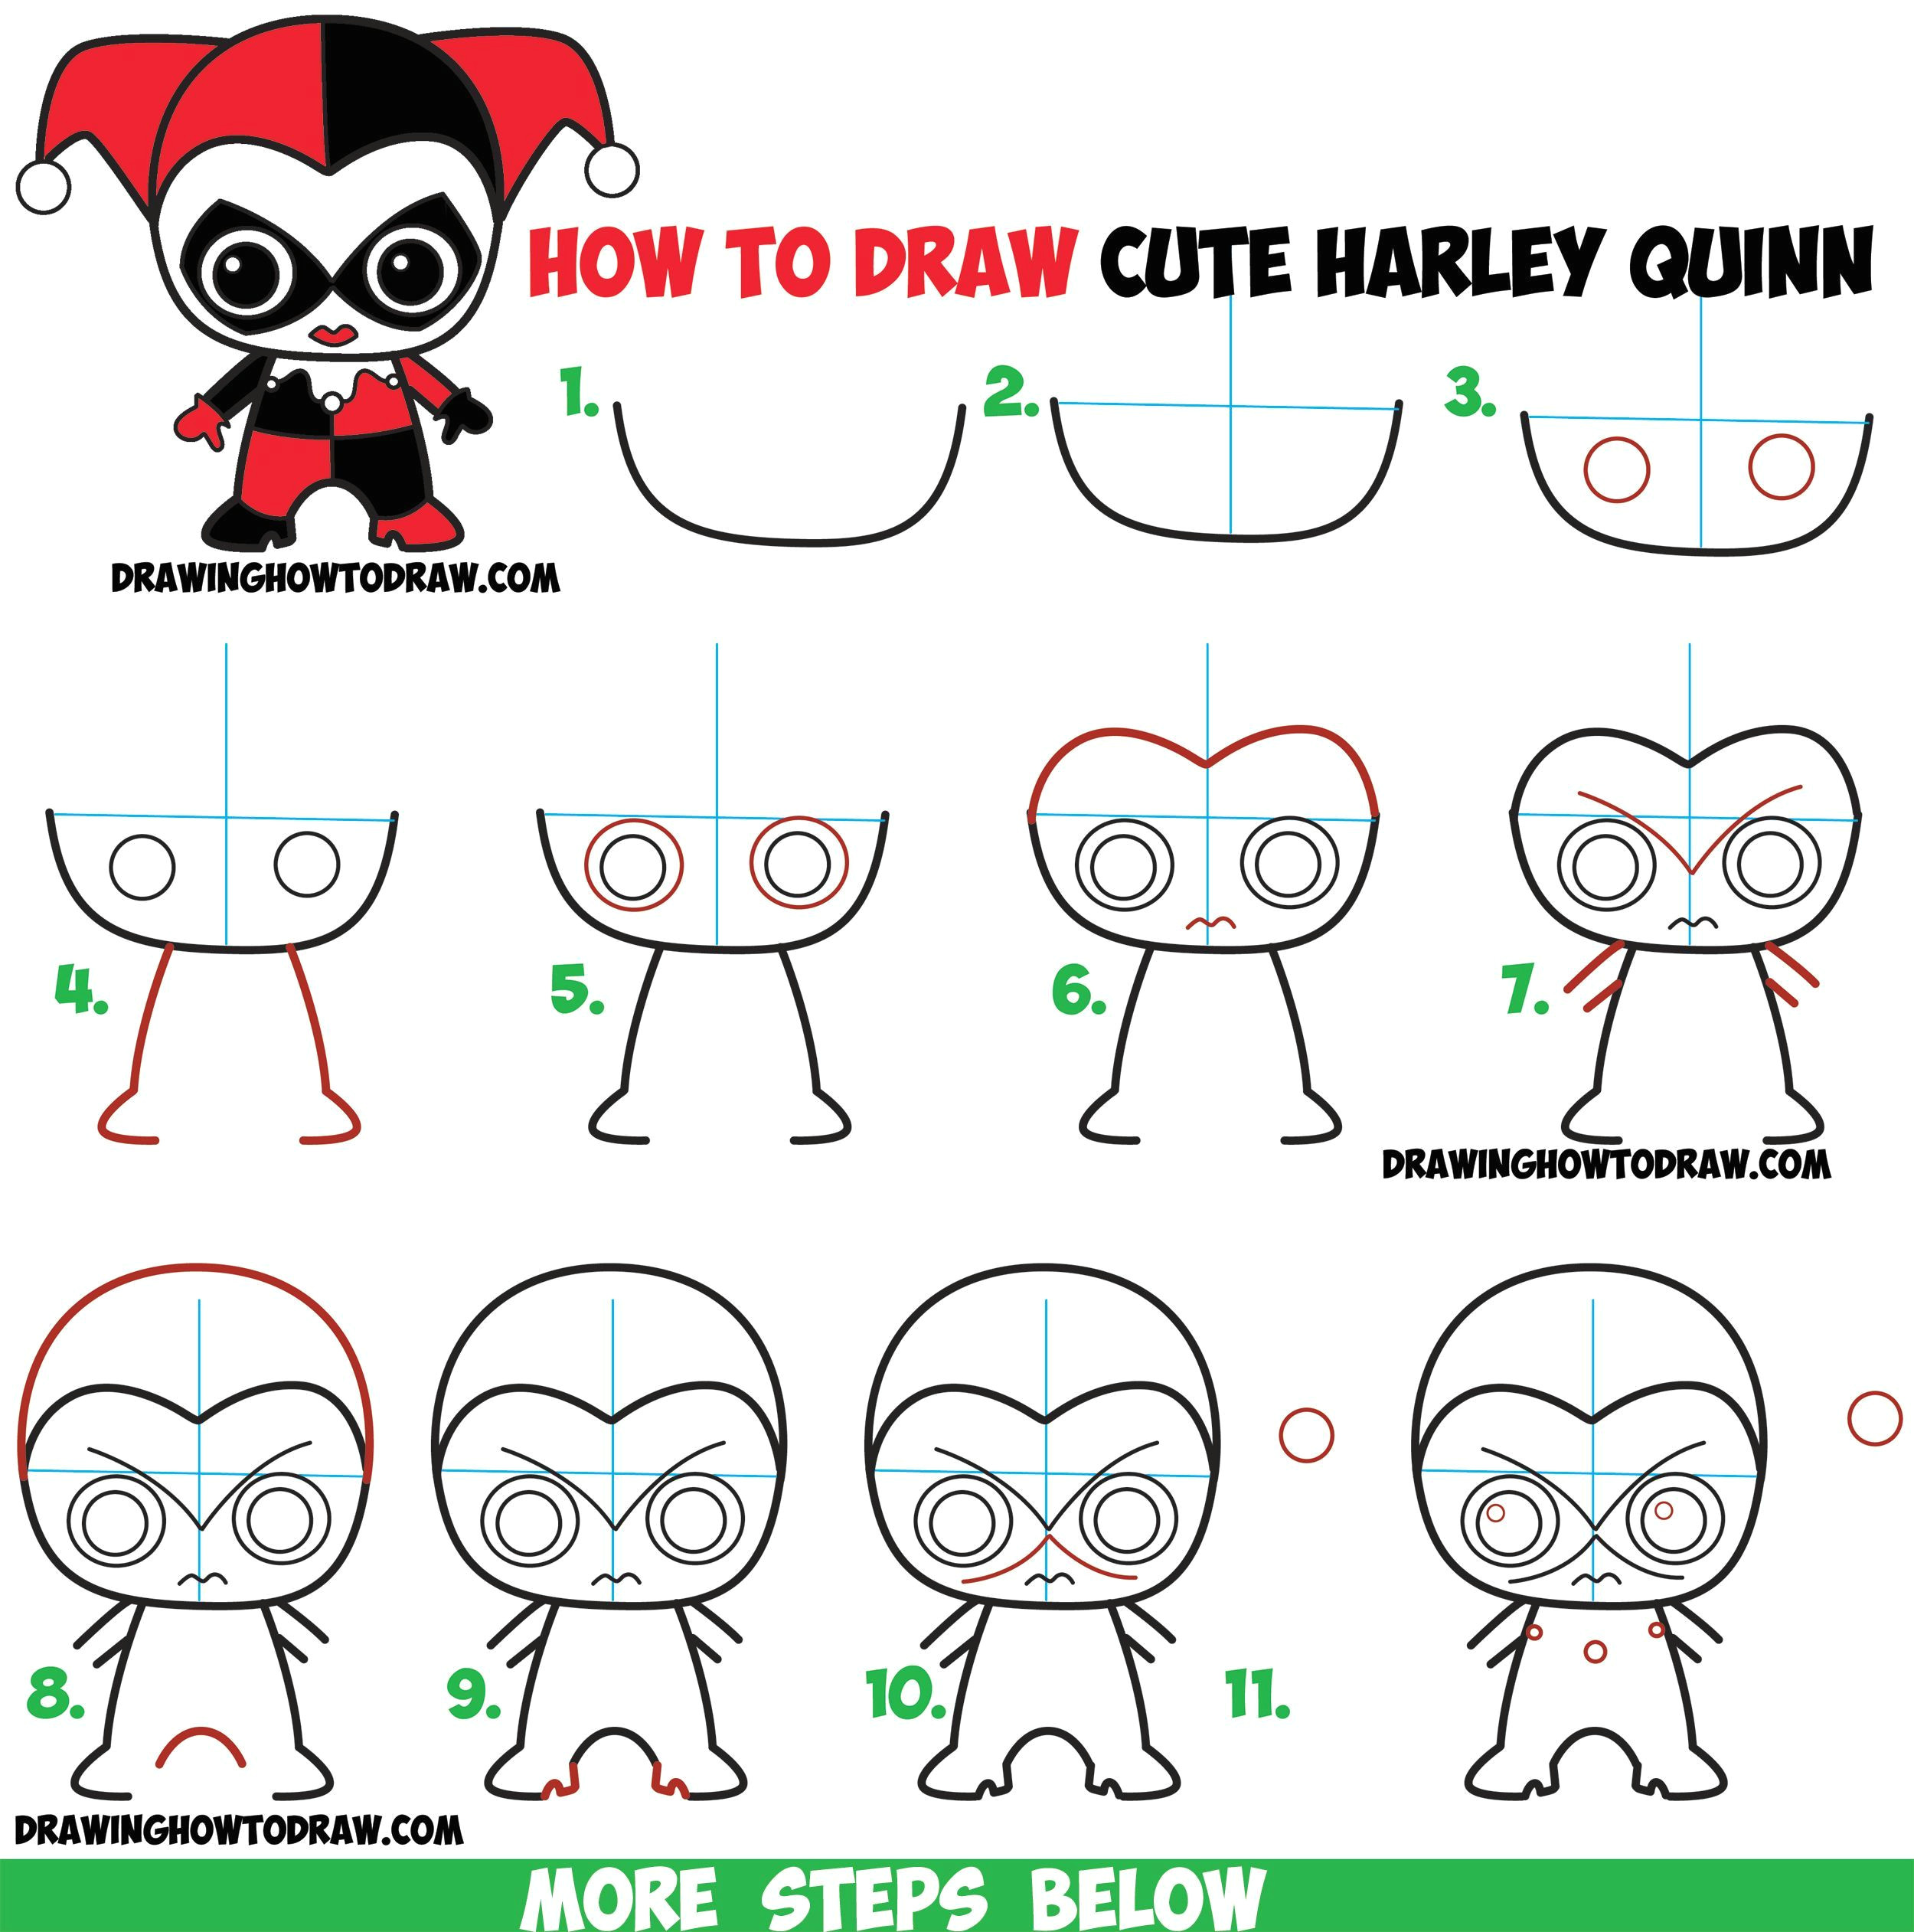 Easy Harley Quinn Drawing How to Draw Cute Chibi Harley Quinn From Dc Comics In Easy